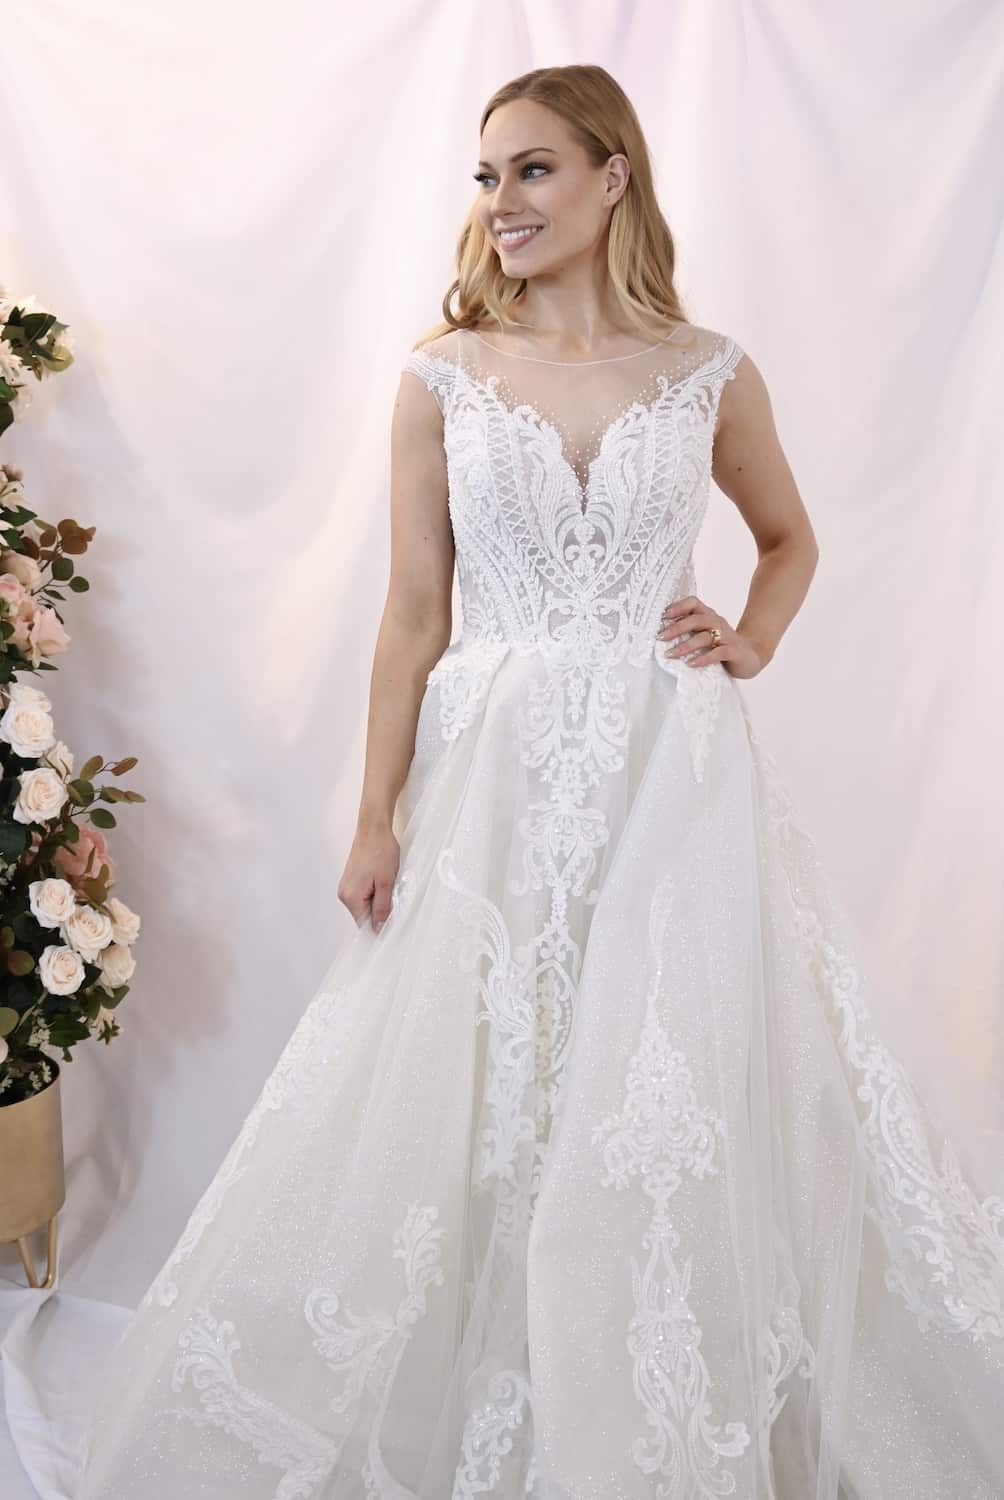 Savvy Bridal Beaded Romantic Detail Lace High Neck, A-Line Skirt Wedding Dress - Lily